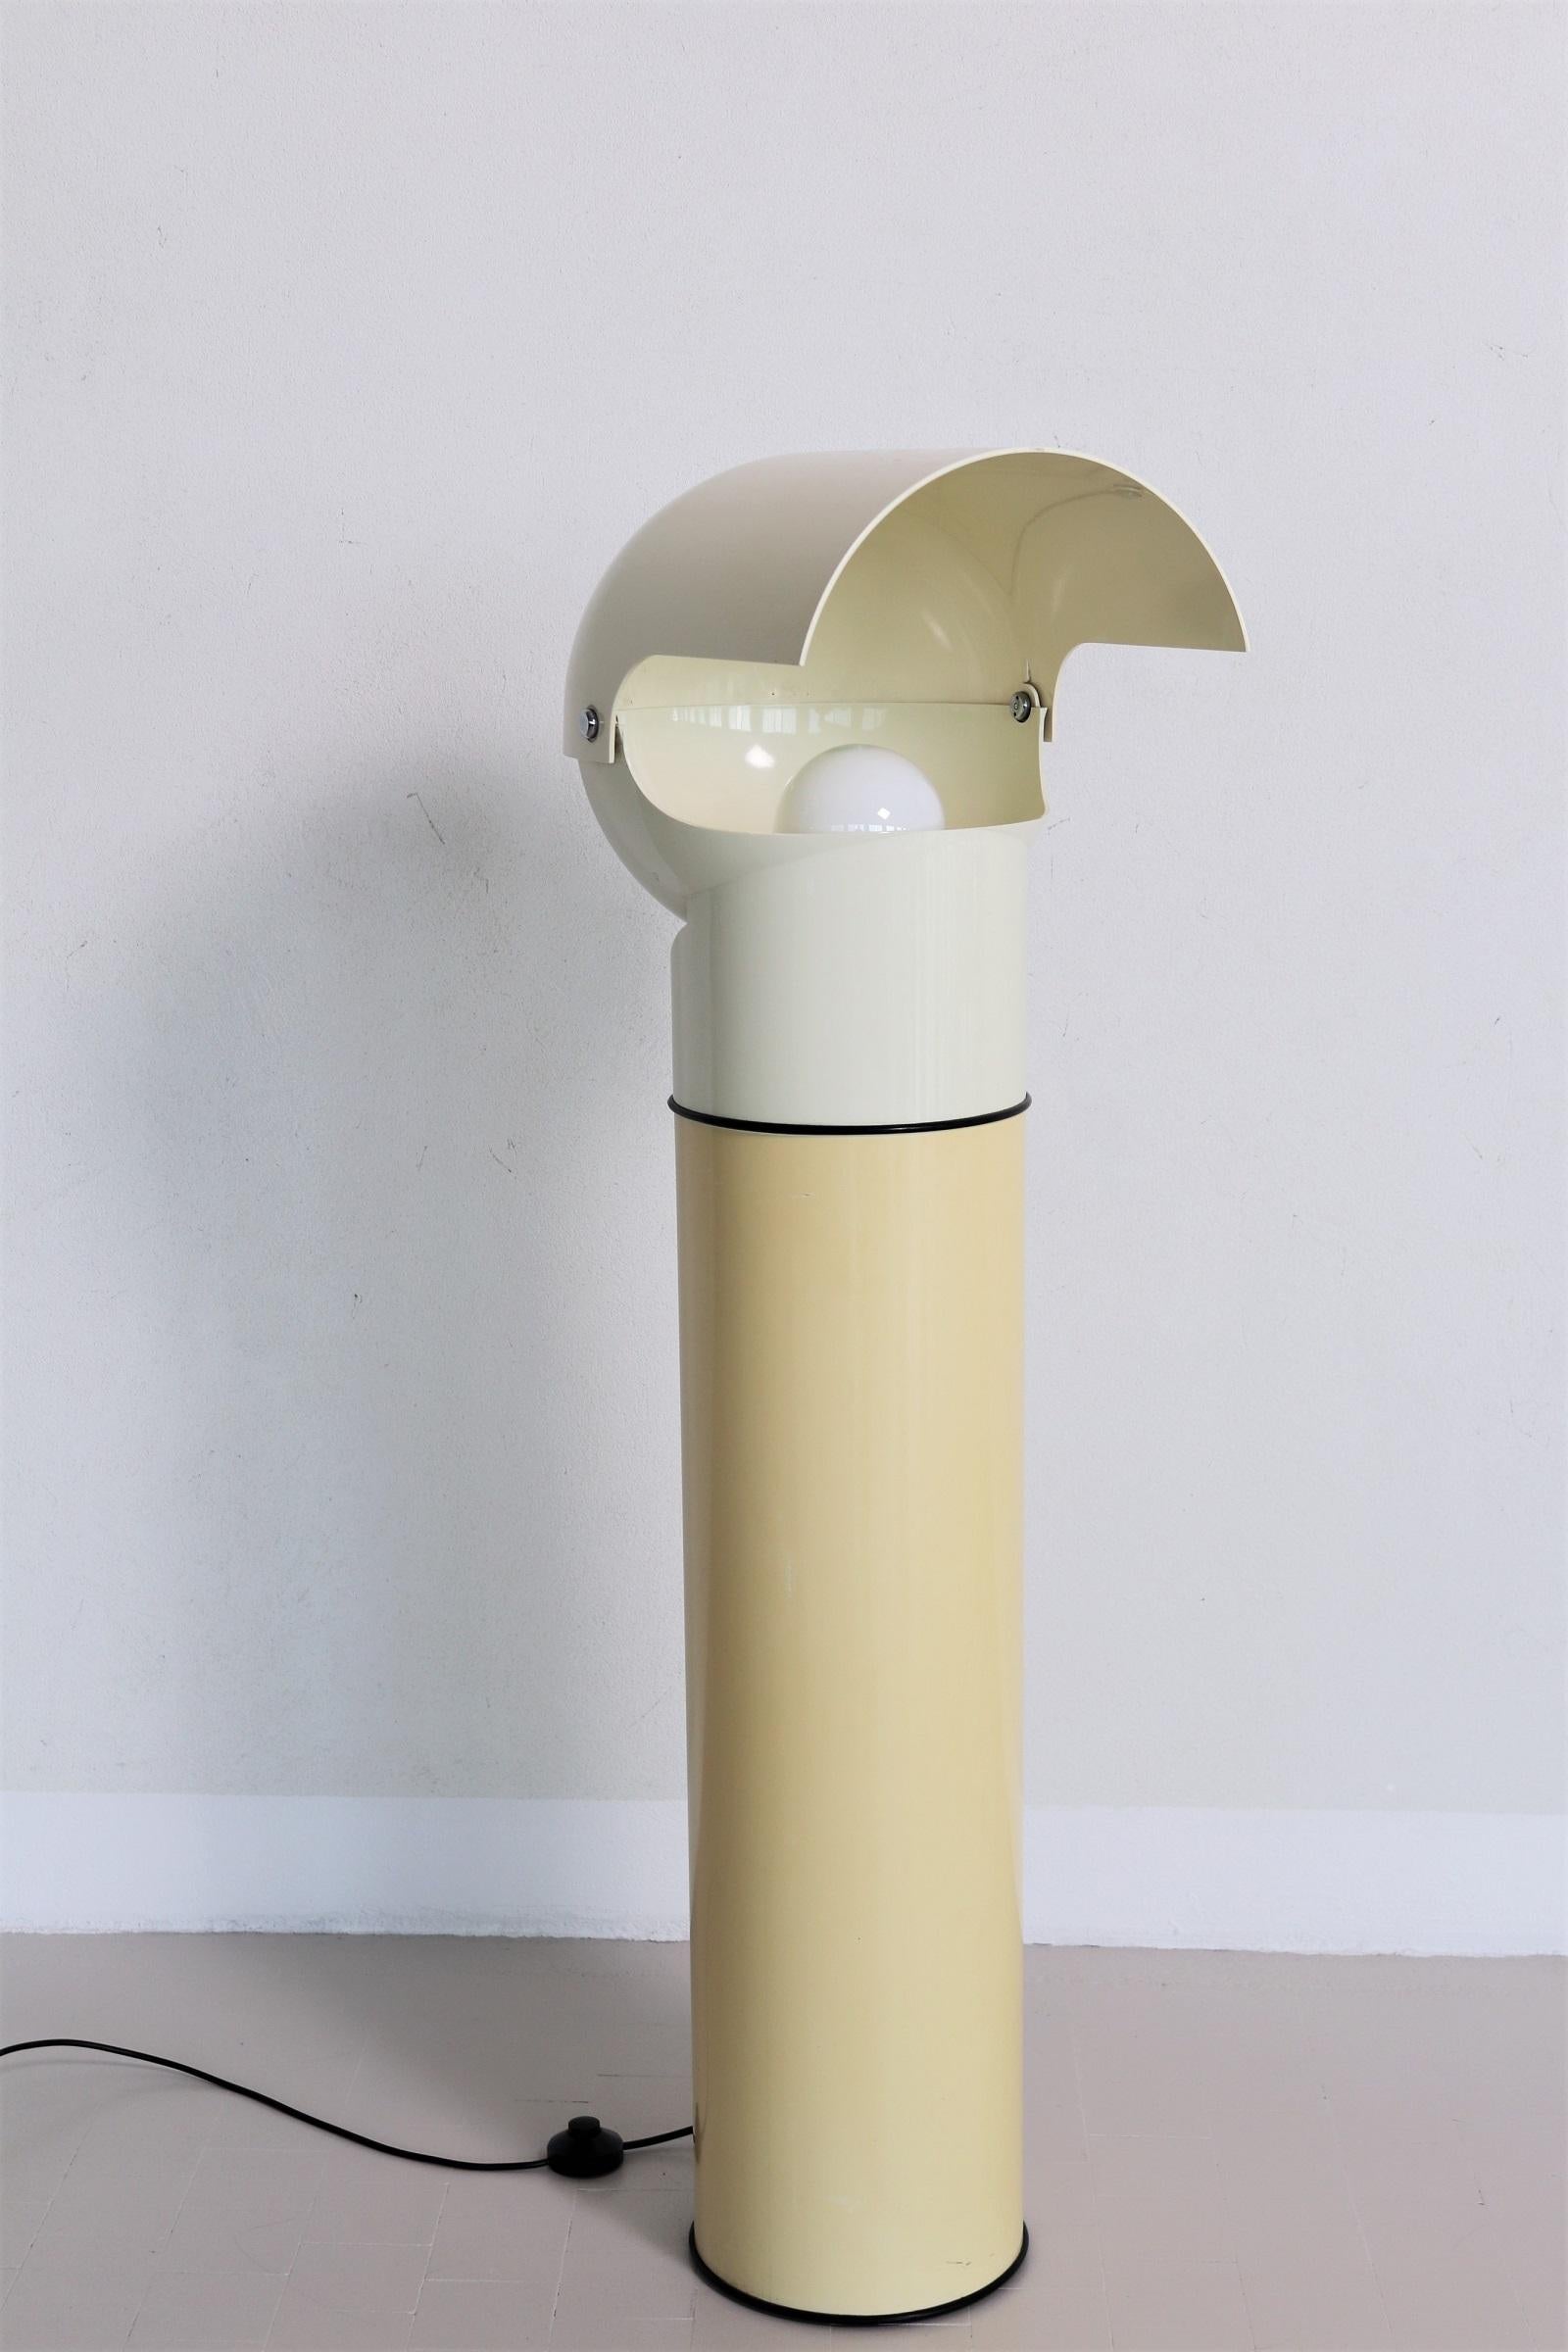 Gorgeous floor lamp of the pop aera designed from Gae Aulenti and manufactured from Artemide in Italy in the 1970s.
This gorgeous design piece is completely made of plastic material; the lampshade can be moved up and down and the light can be